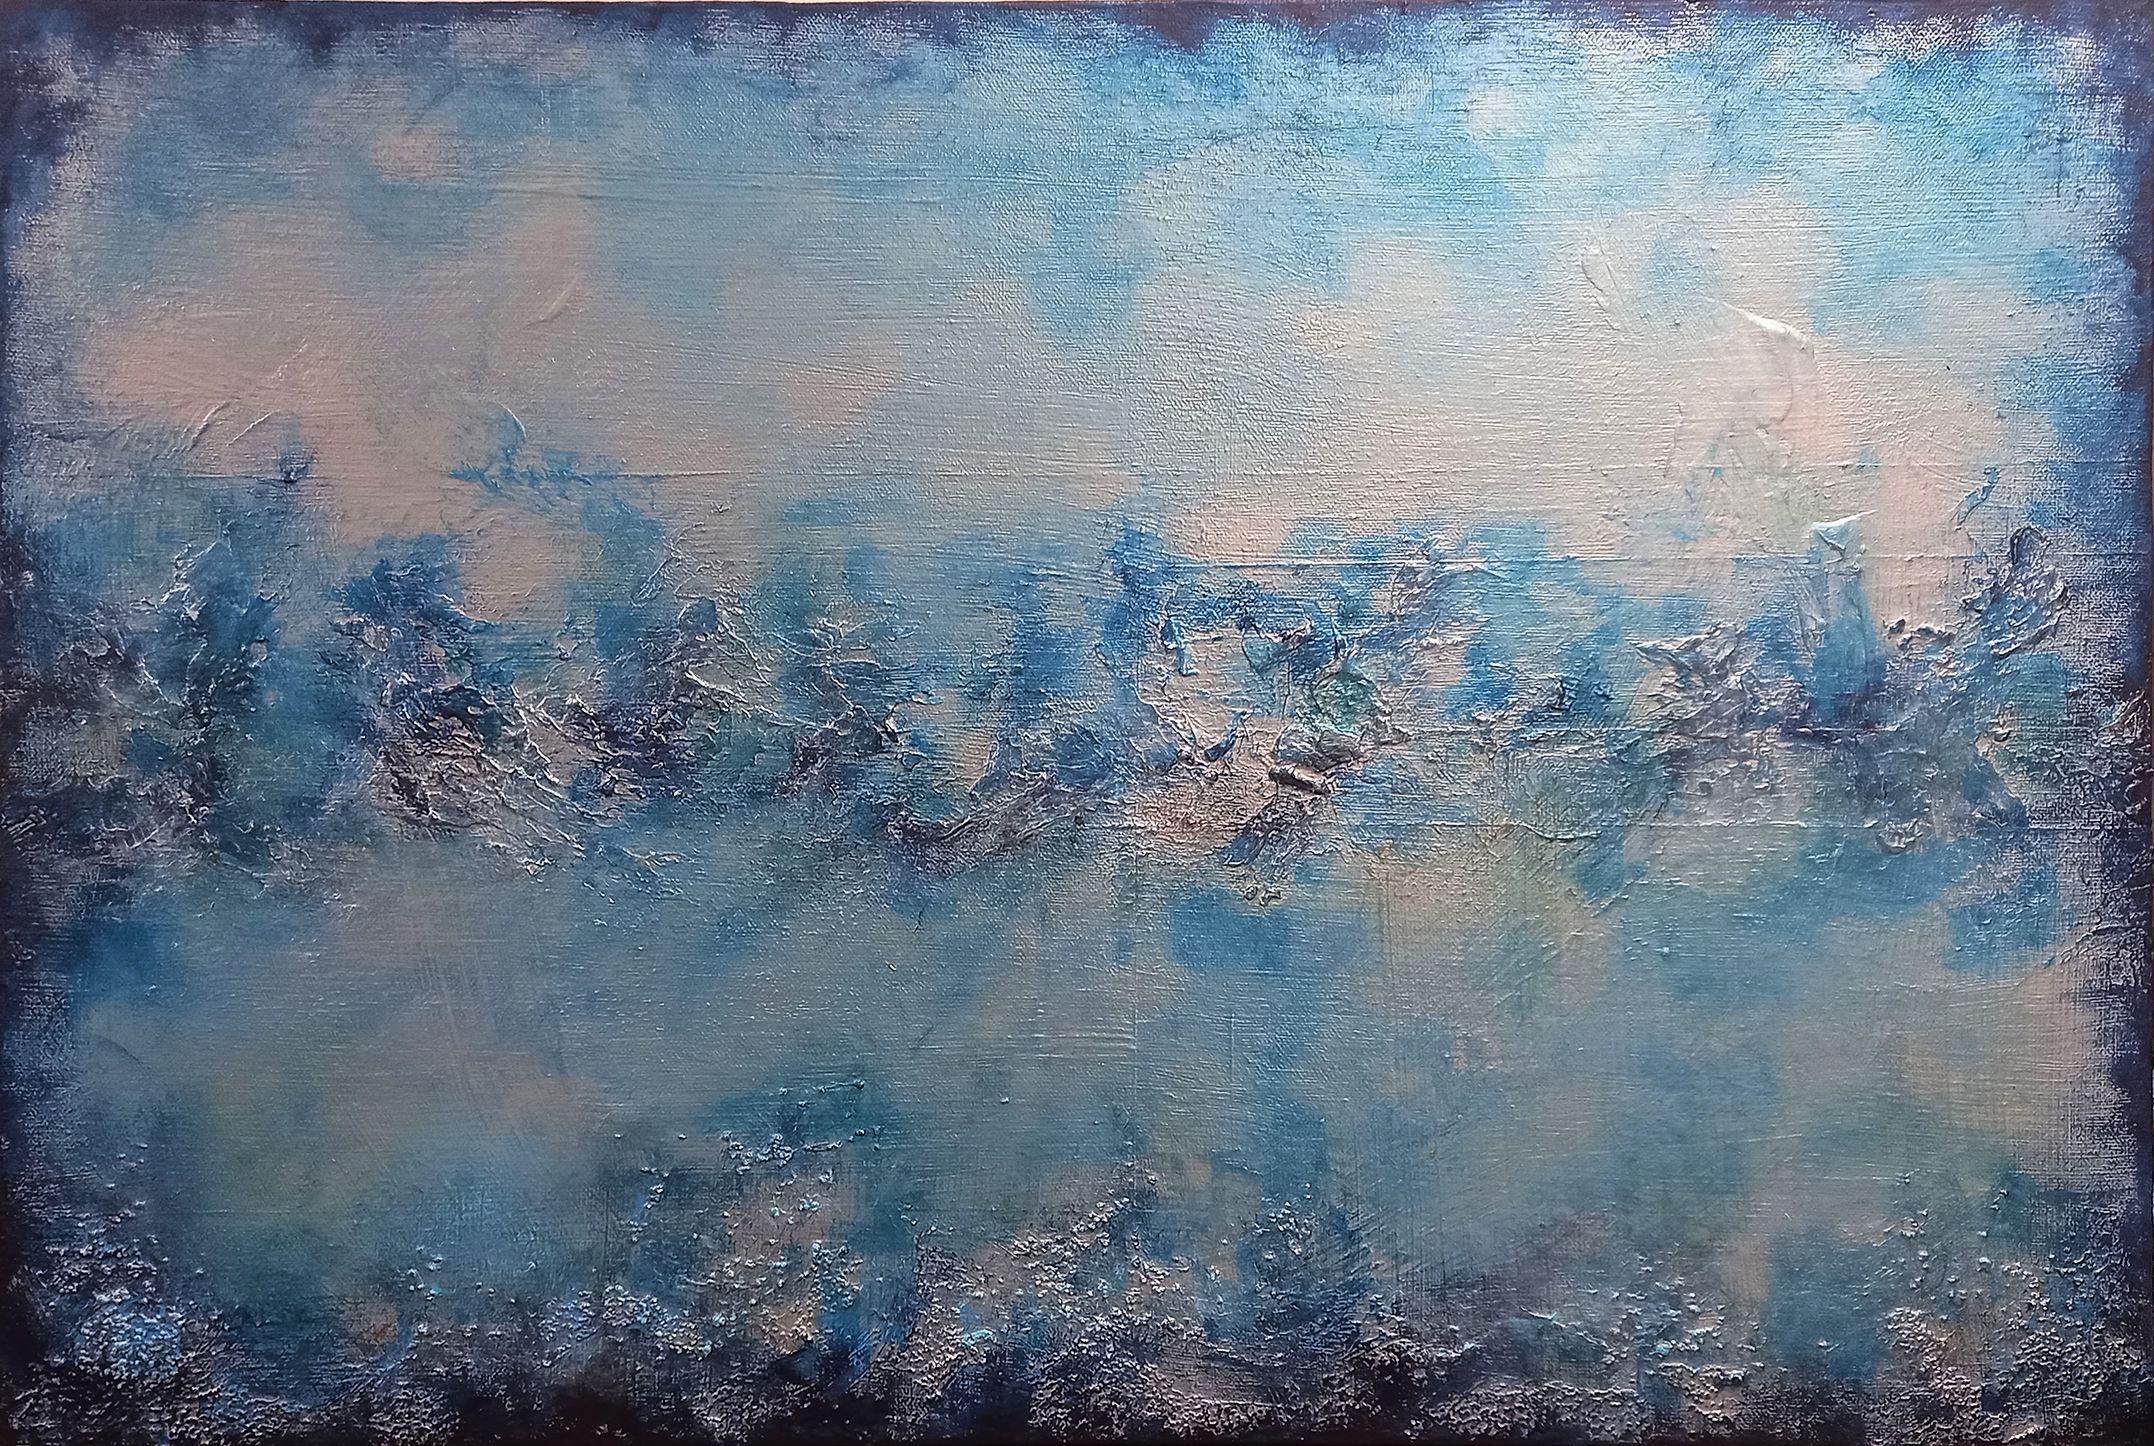 XL Blue Bay 76 x 51cm Textured Abstract Painting    Silver and Blue textured and has been created with various Blue Hues and Silver    Textured painting was created using a blend of techniques including brush and palette knife. High quality acrylics